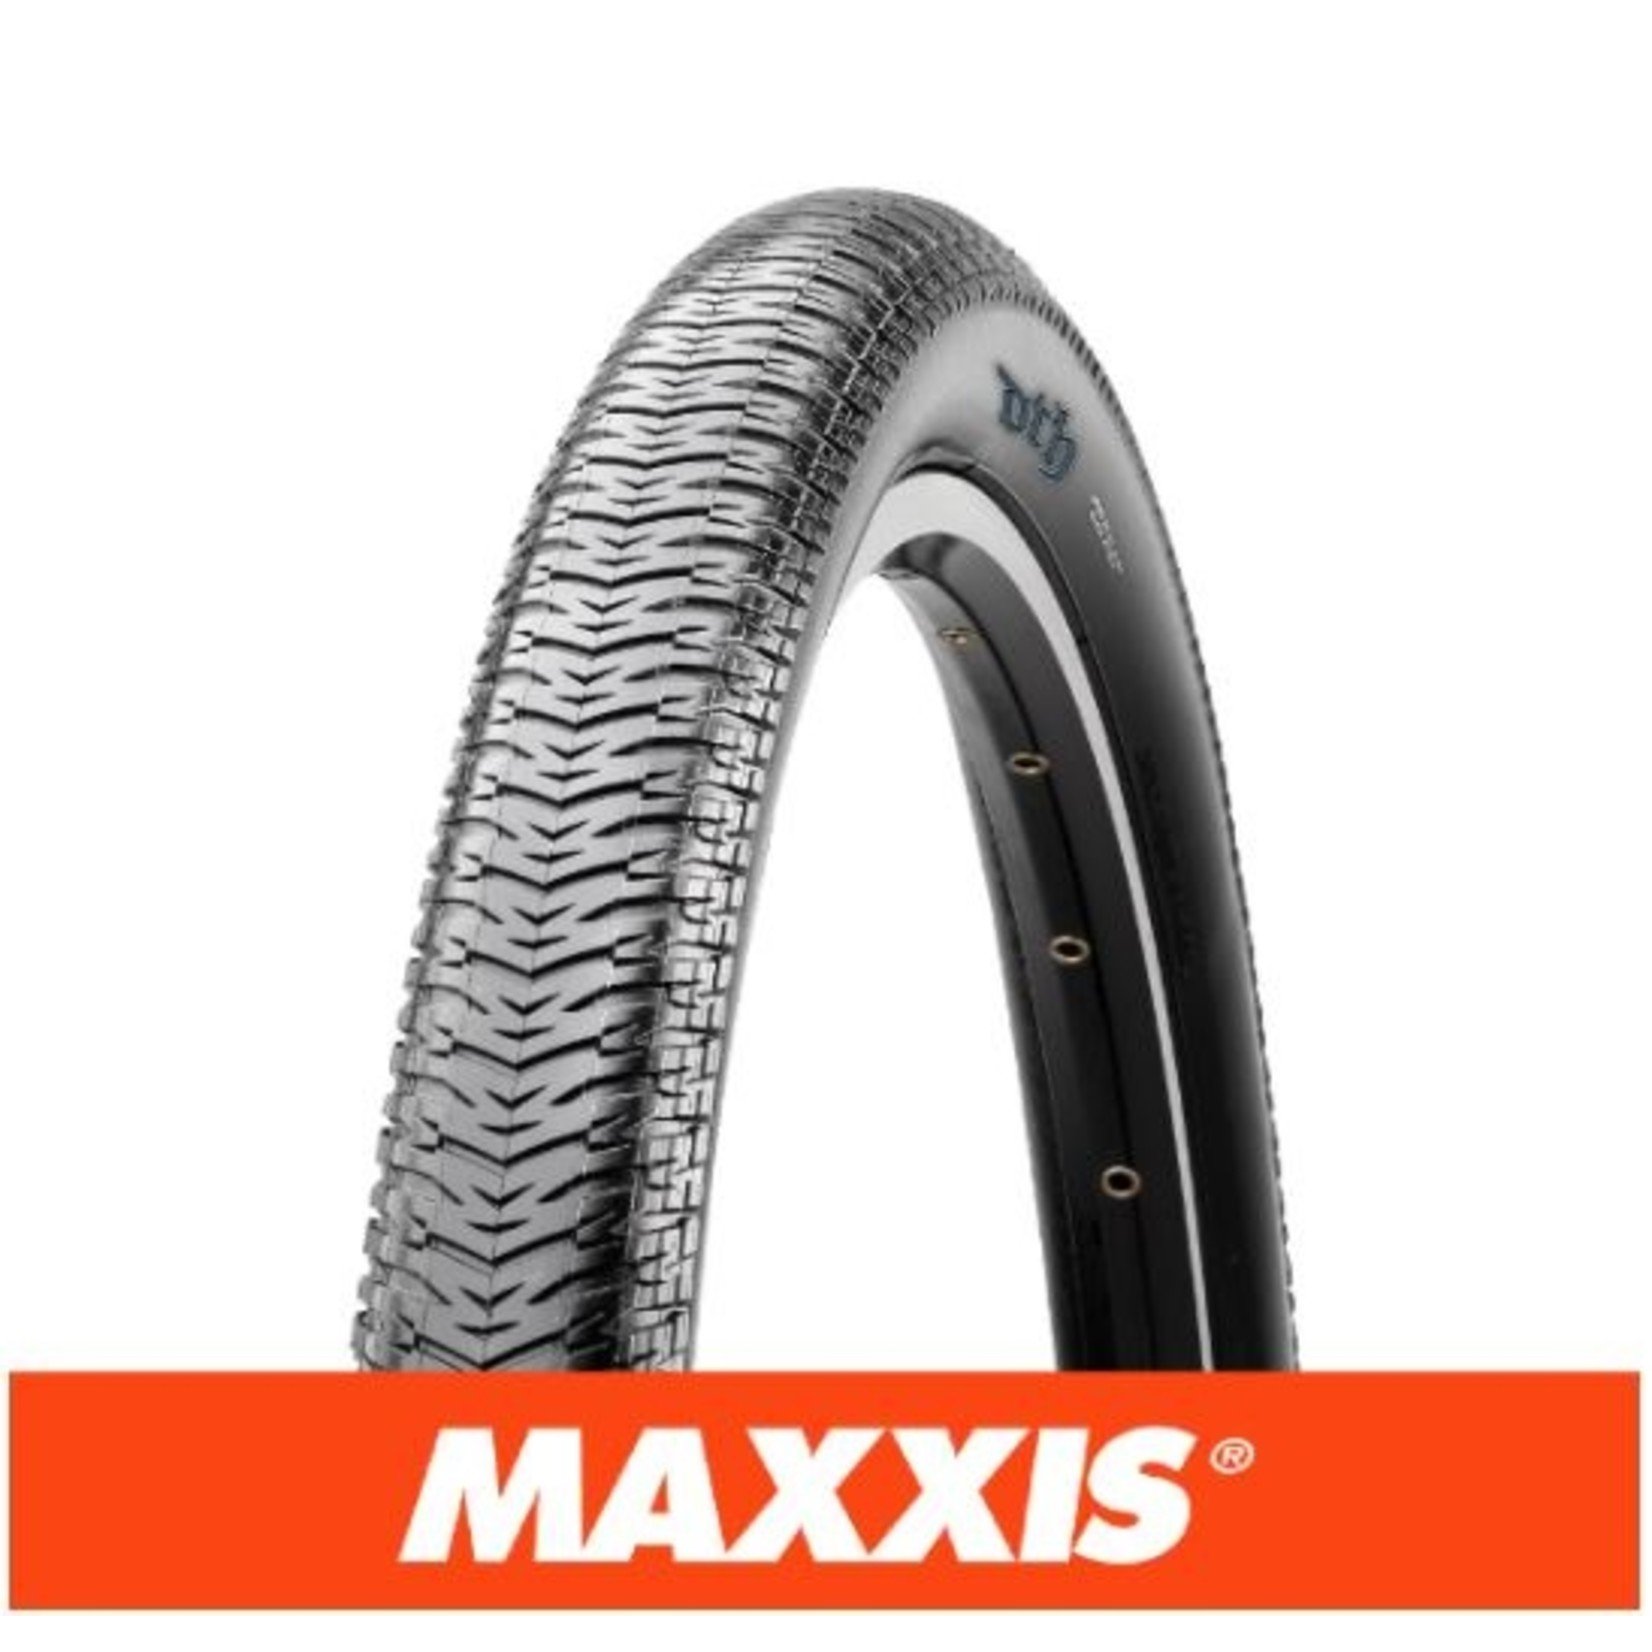 Maxxis Maxxis Drop-The-Hammer (DTH) Bike Tyre - 20 X 1.75 - Wirebead 120 TPI Exo